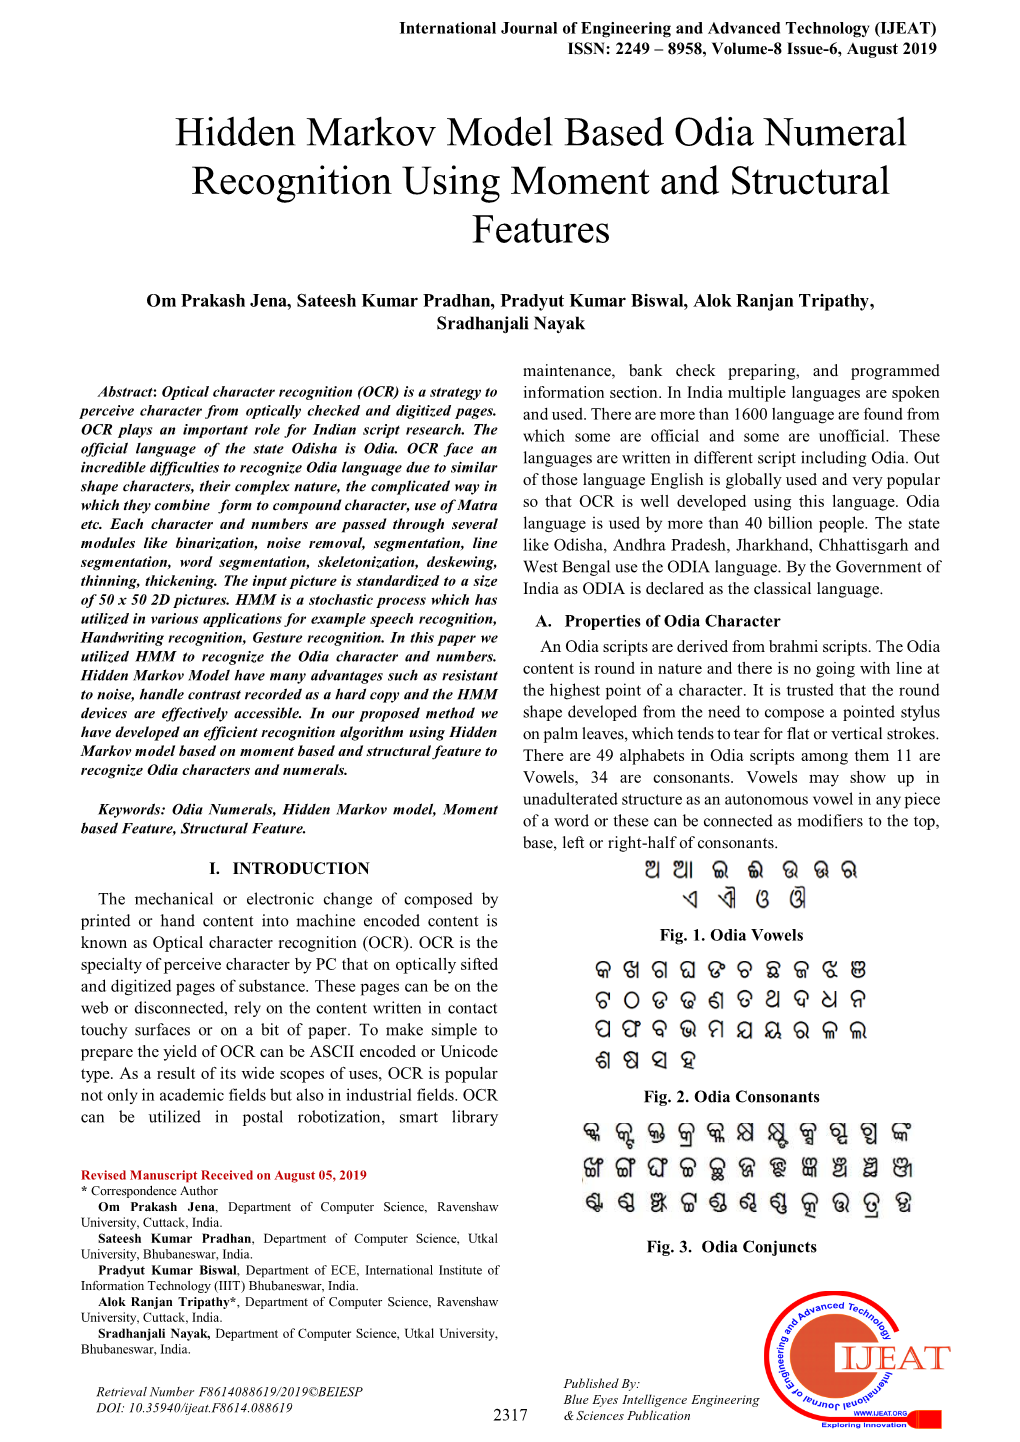 Hidden Markov Model Based Odia Numeral Recognition Using Moment and Structural Features